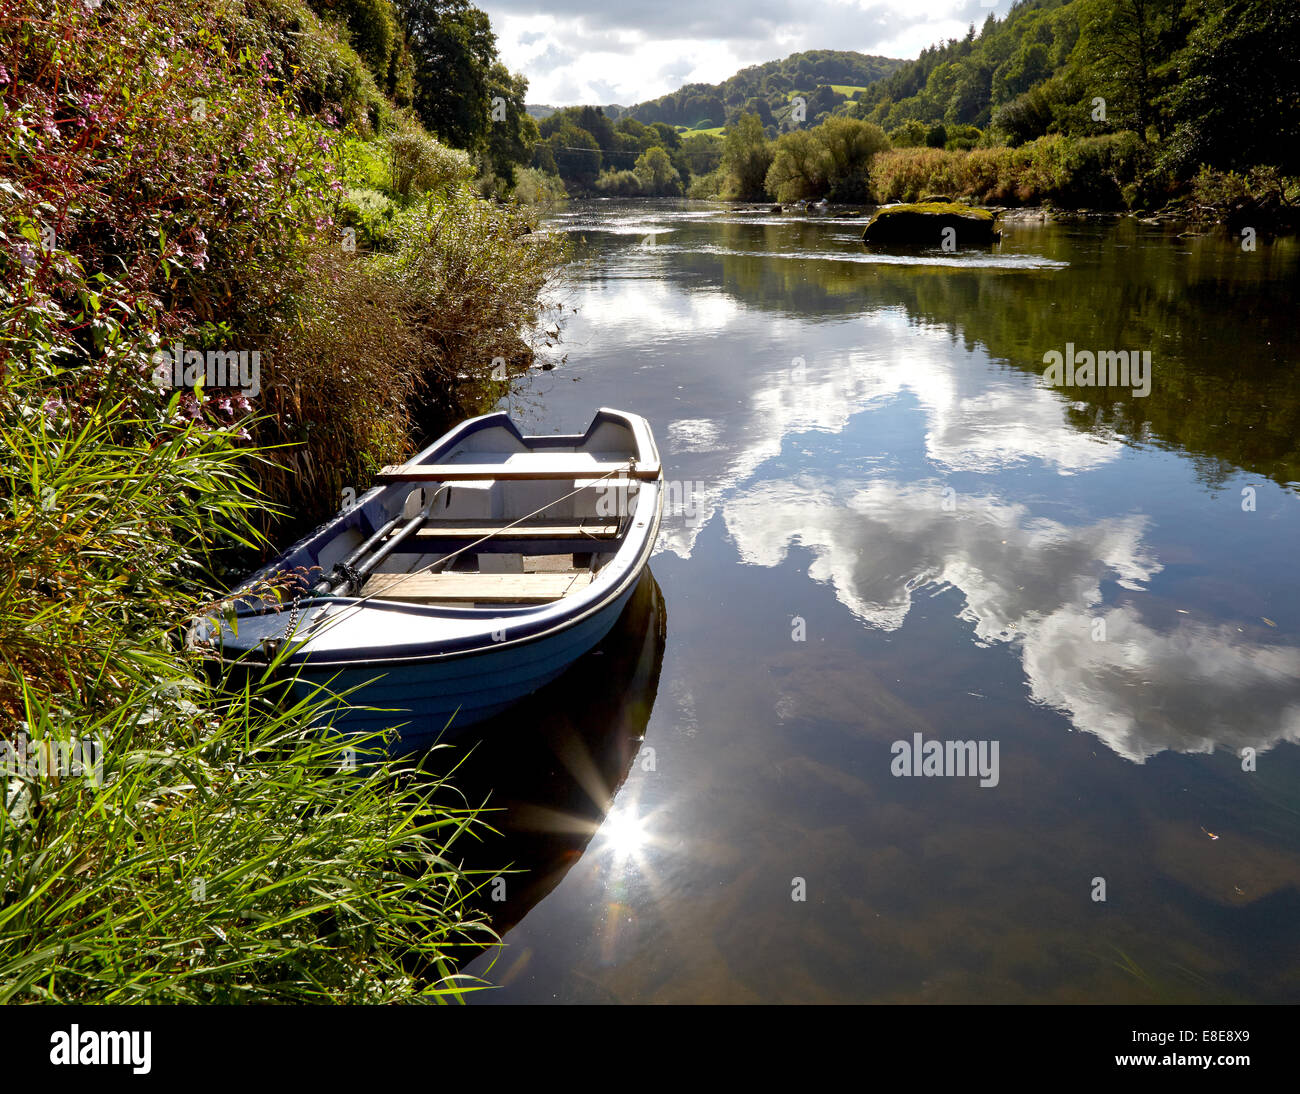 Barca sulla banca del fiume Wye in Monmouthshire Wales UK Foto Stock